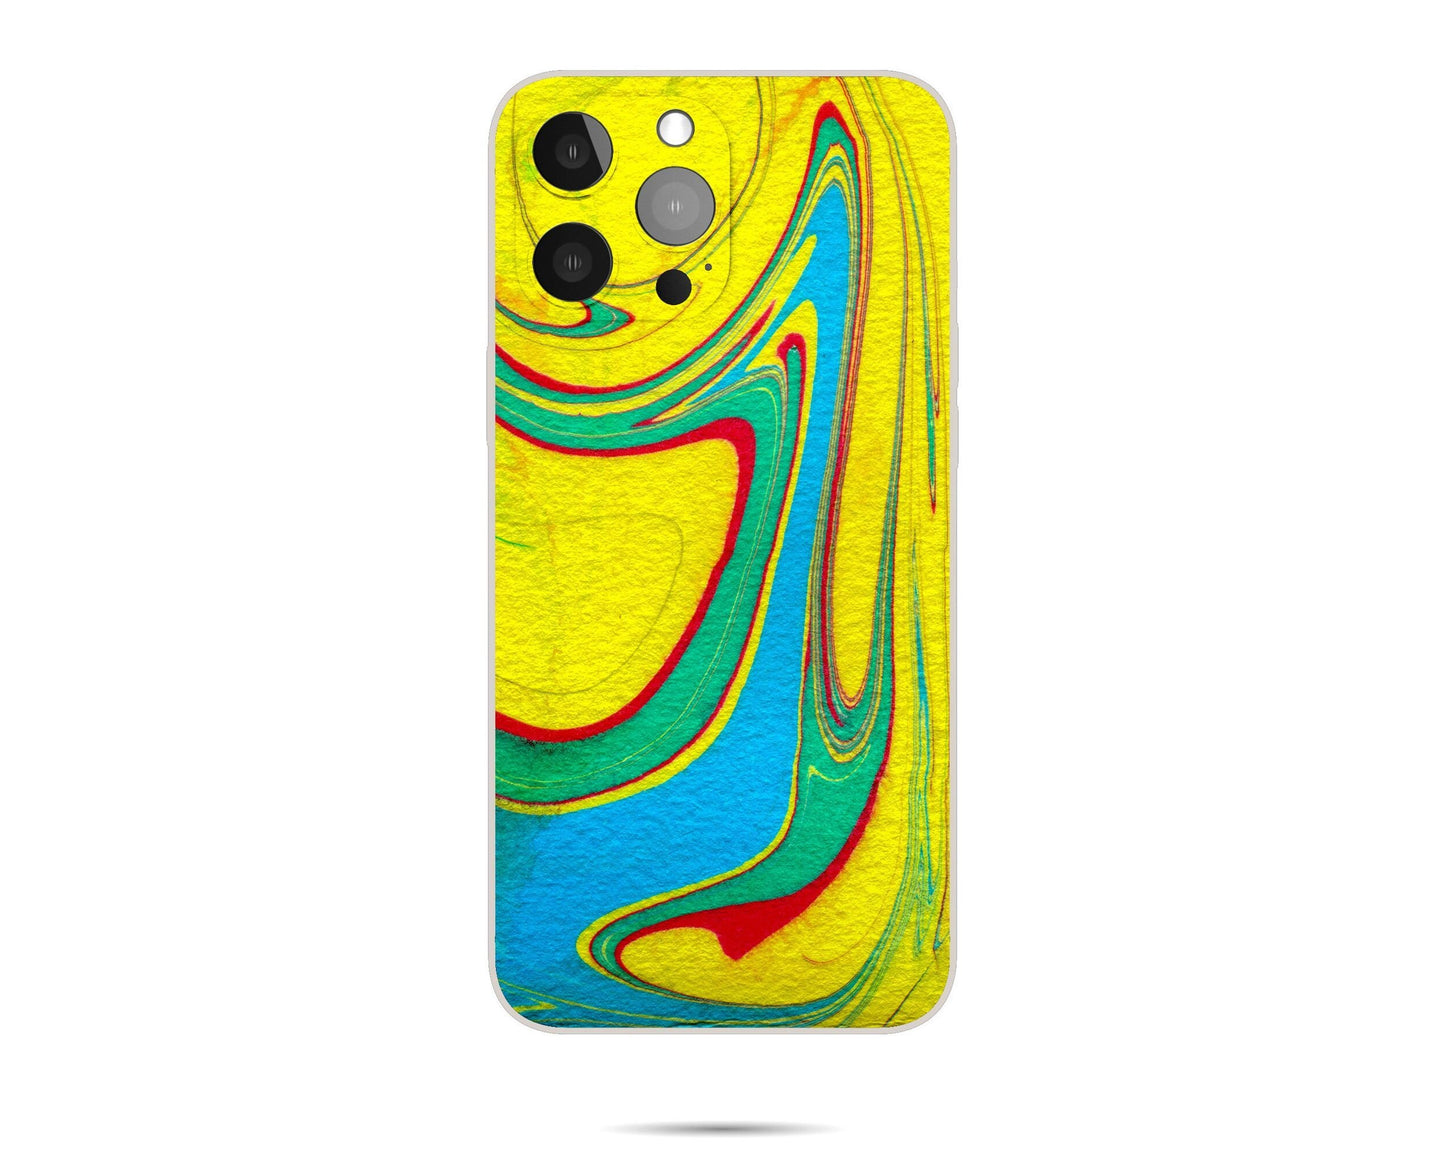 Abstract Art Iphone 14 Case Iphone Case, Iphone 14 Pro Case, Iphone Se 2020, Iphone 8 Plus Case Art, Protective Case, Iphone Case Silicone